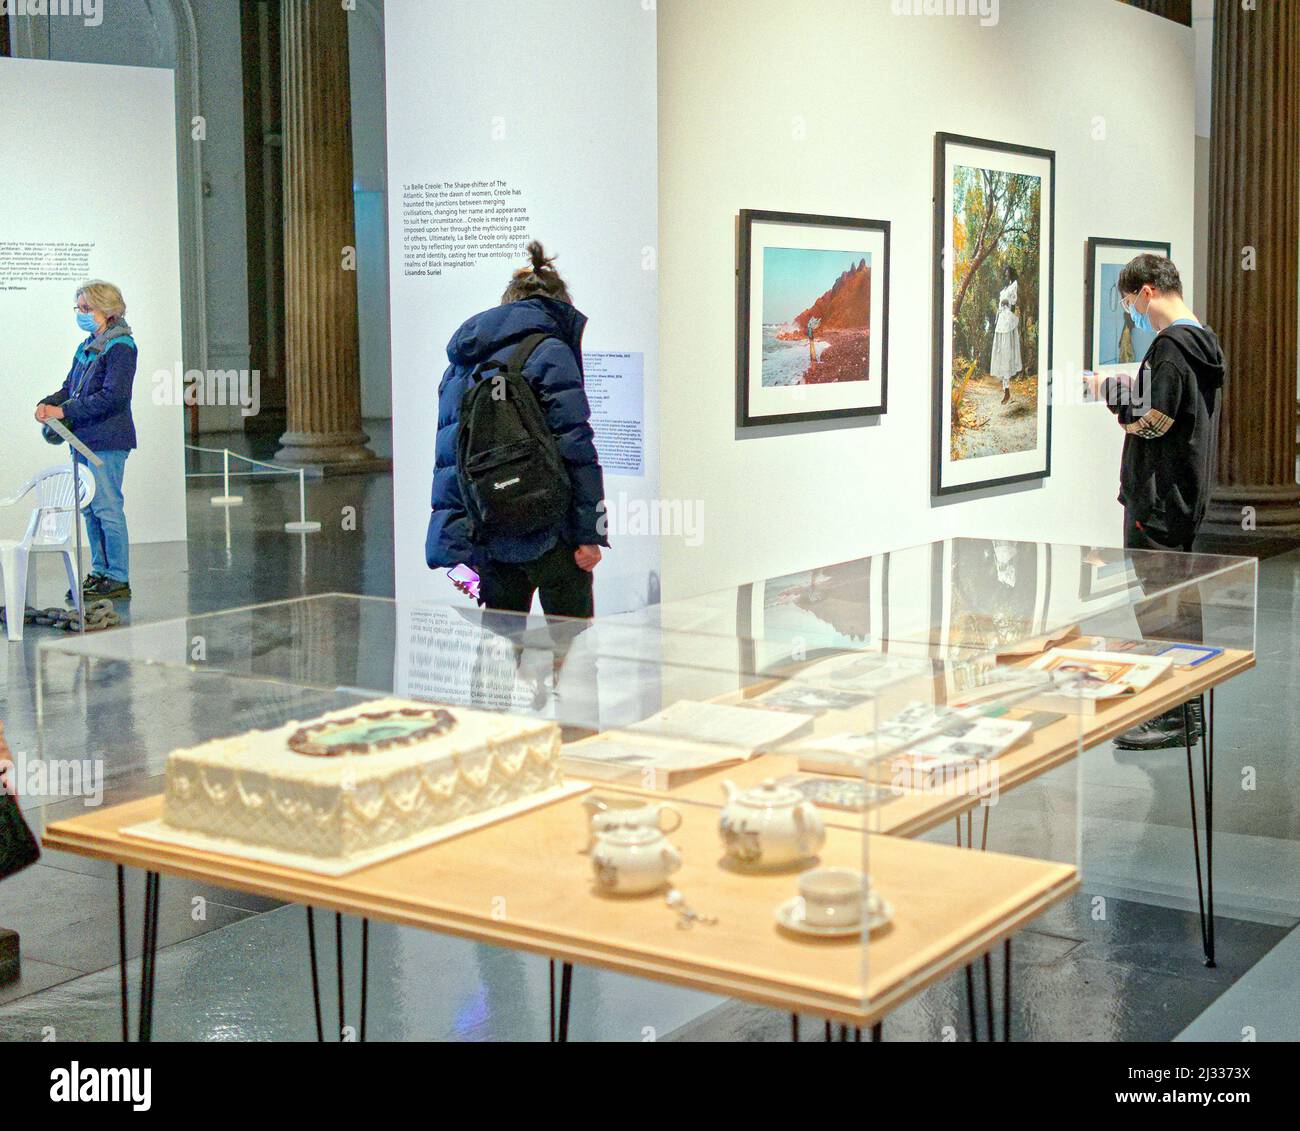 Glasgow, Scotland, UK 5th April, 2022.Revisiting Black Artists exhibition at the gallery of modern Art or GOMA as its known. See photographed panel for more information. From mother tongue and glasgow museums from their collection. Credit Gerard Ferry/Alamy Live News Stock Photo